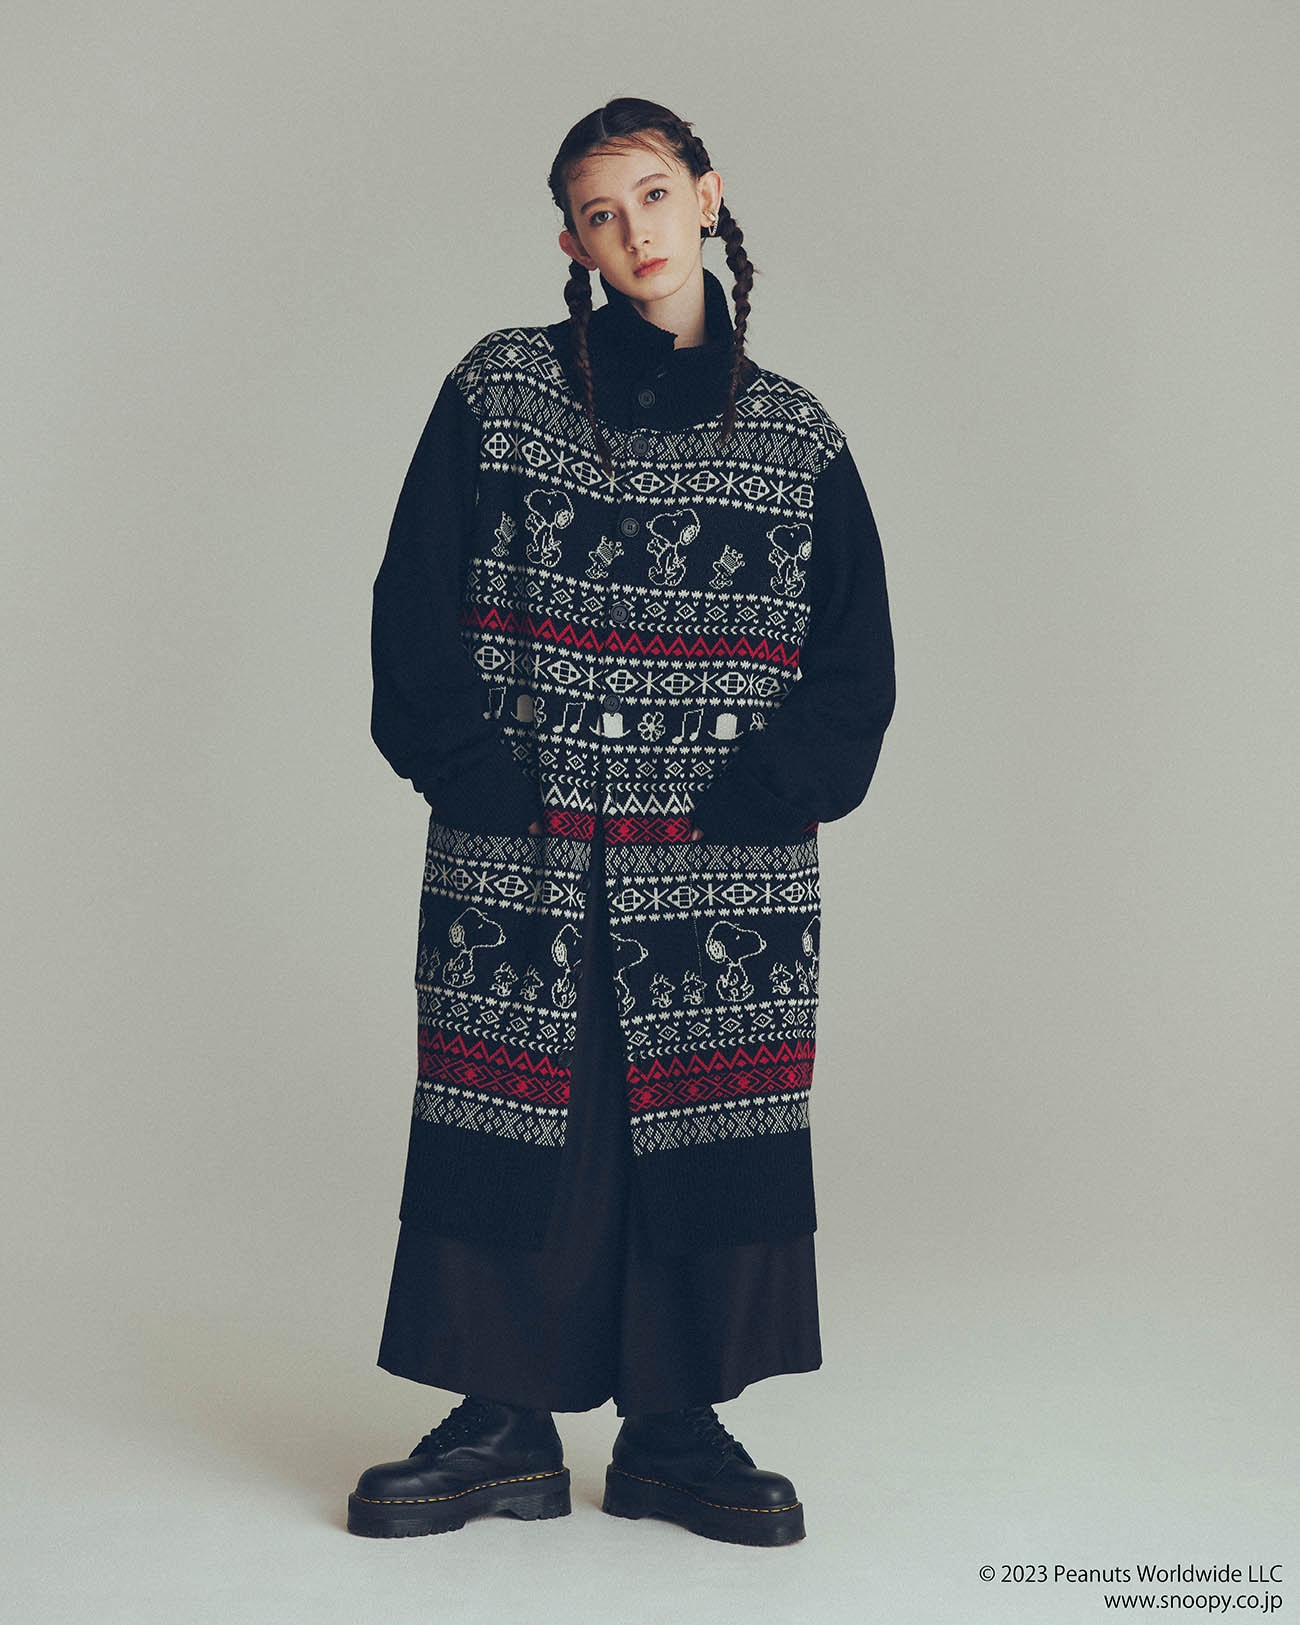 S'YTE x PEANUTS BULKY WOOL UNIQUE NORDIC PATTERN LONG CARDIGAN